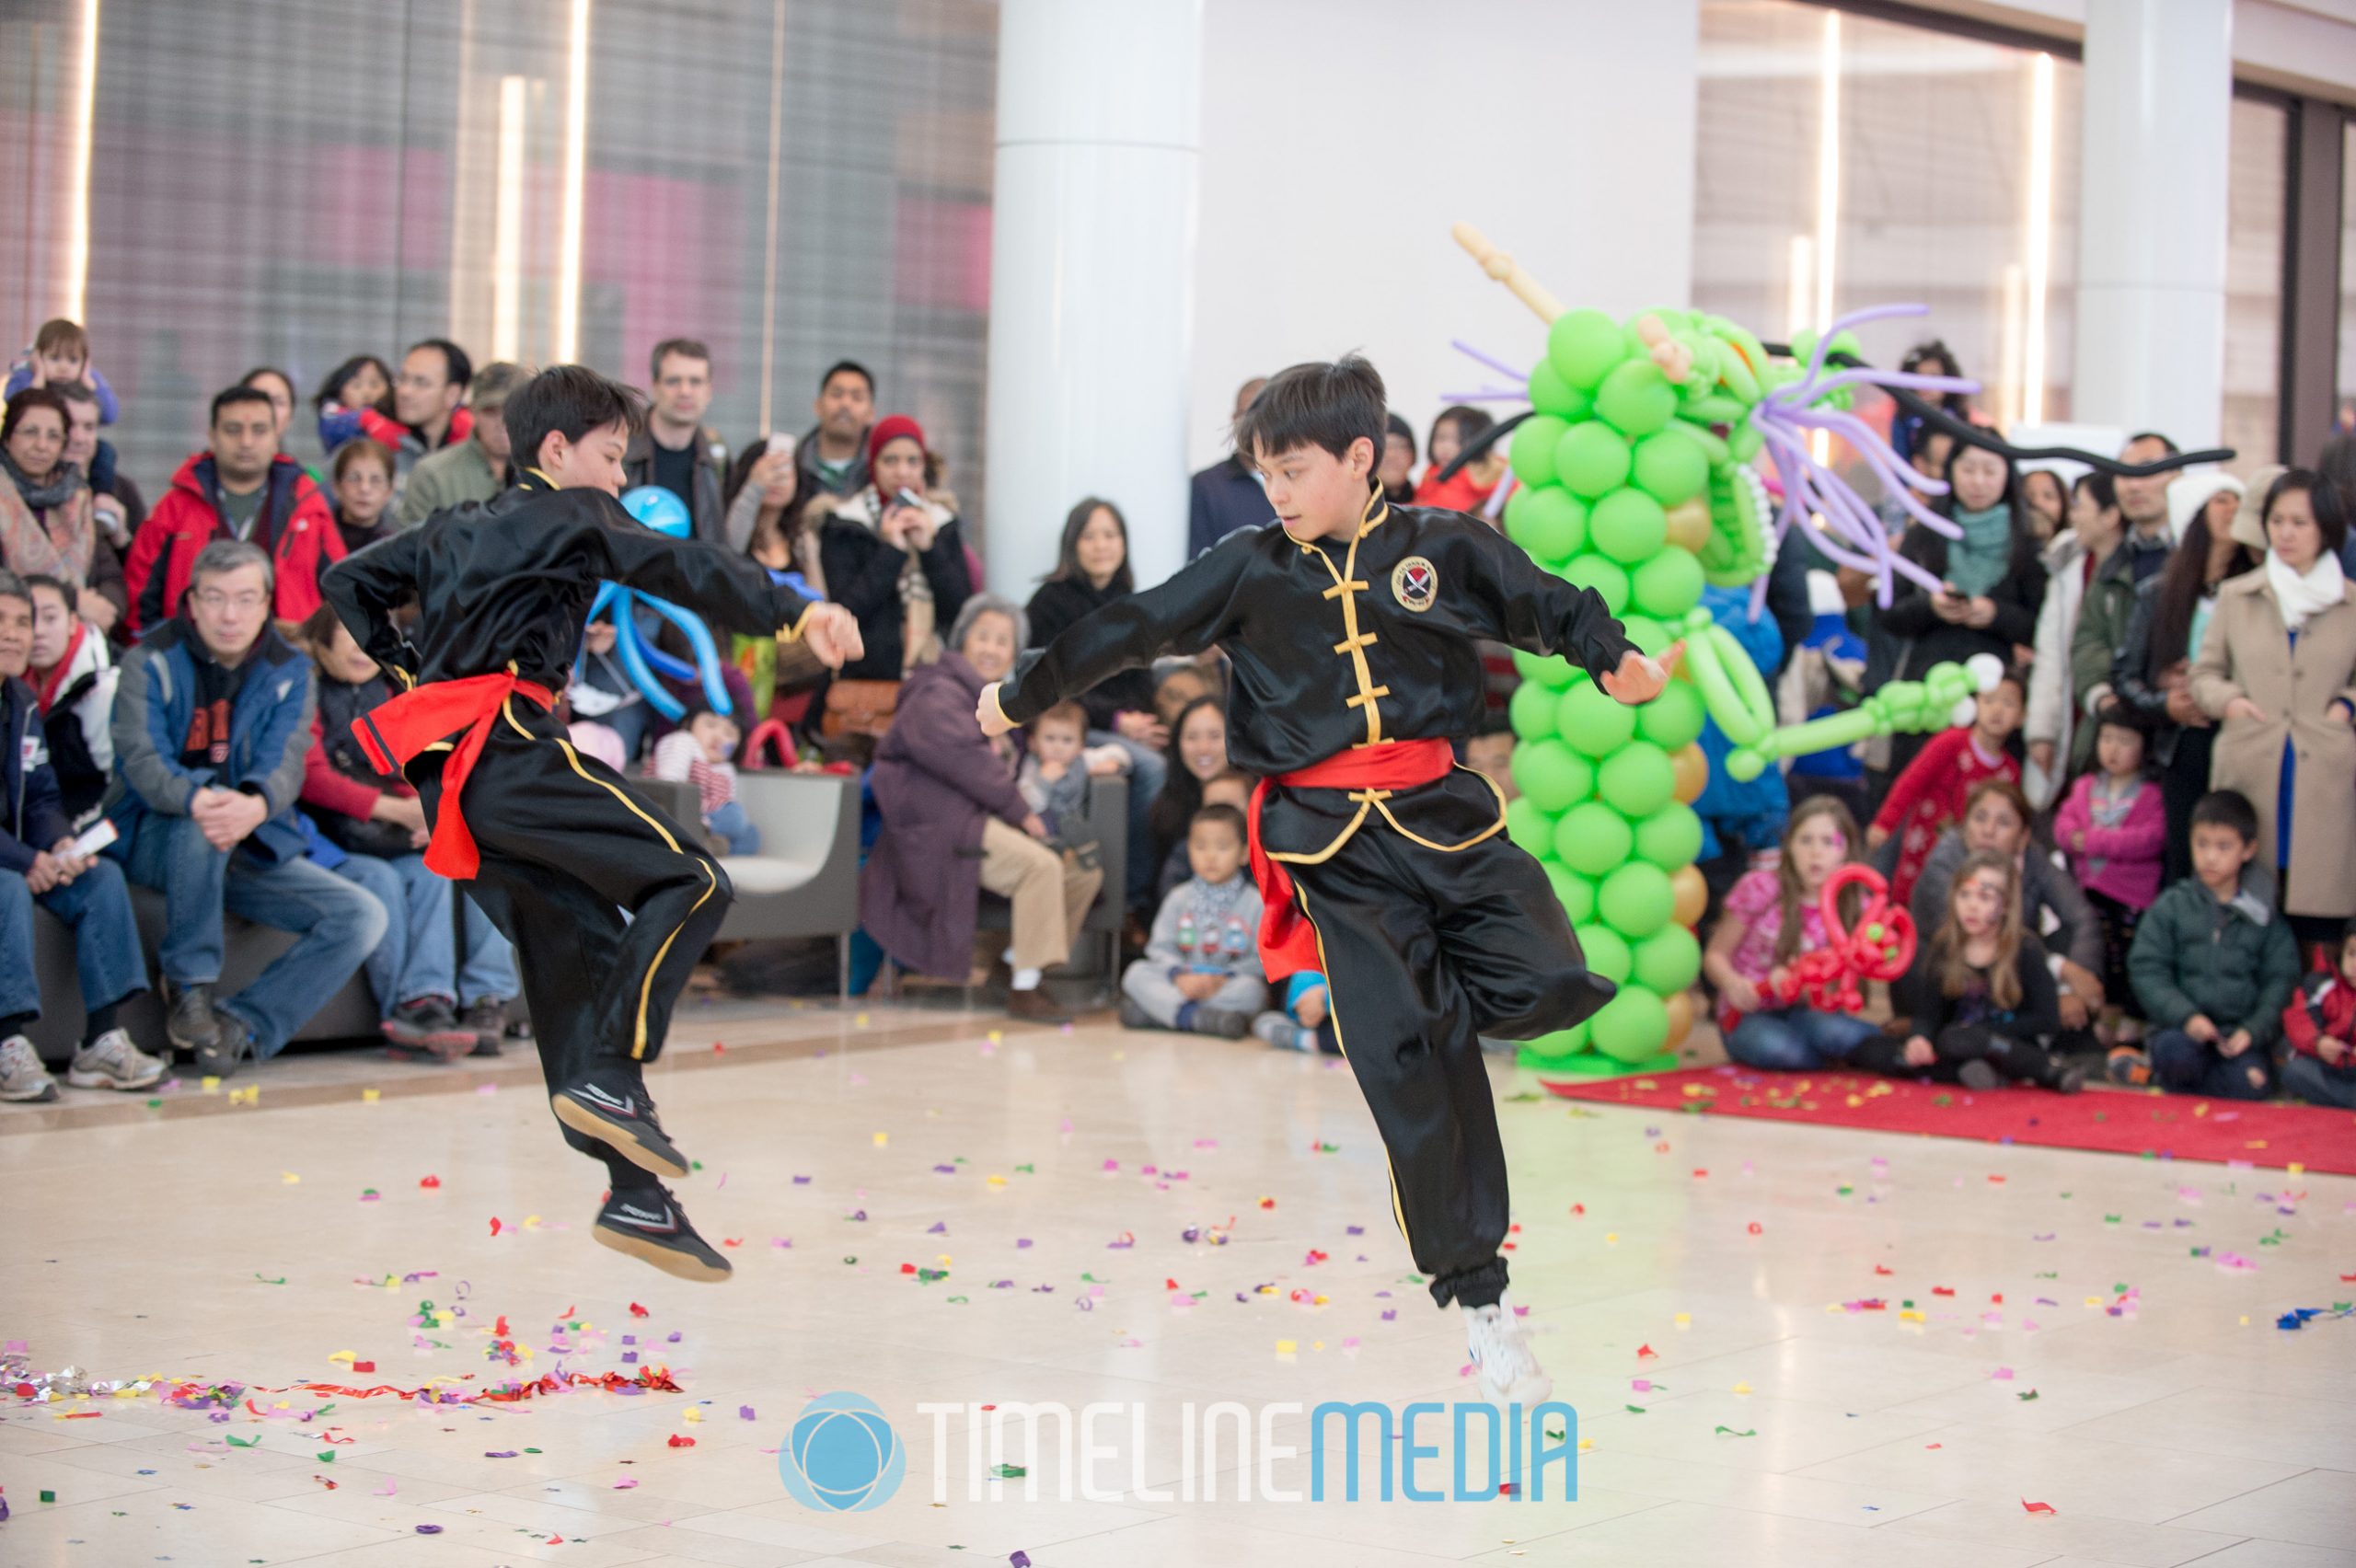 Martial artists performing at Tysons Corner Center Concourse ©TimeLine Media